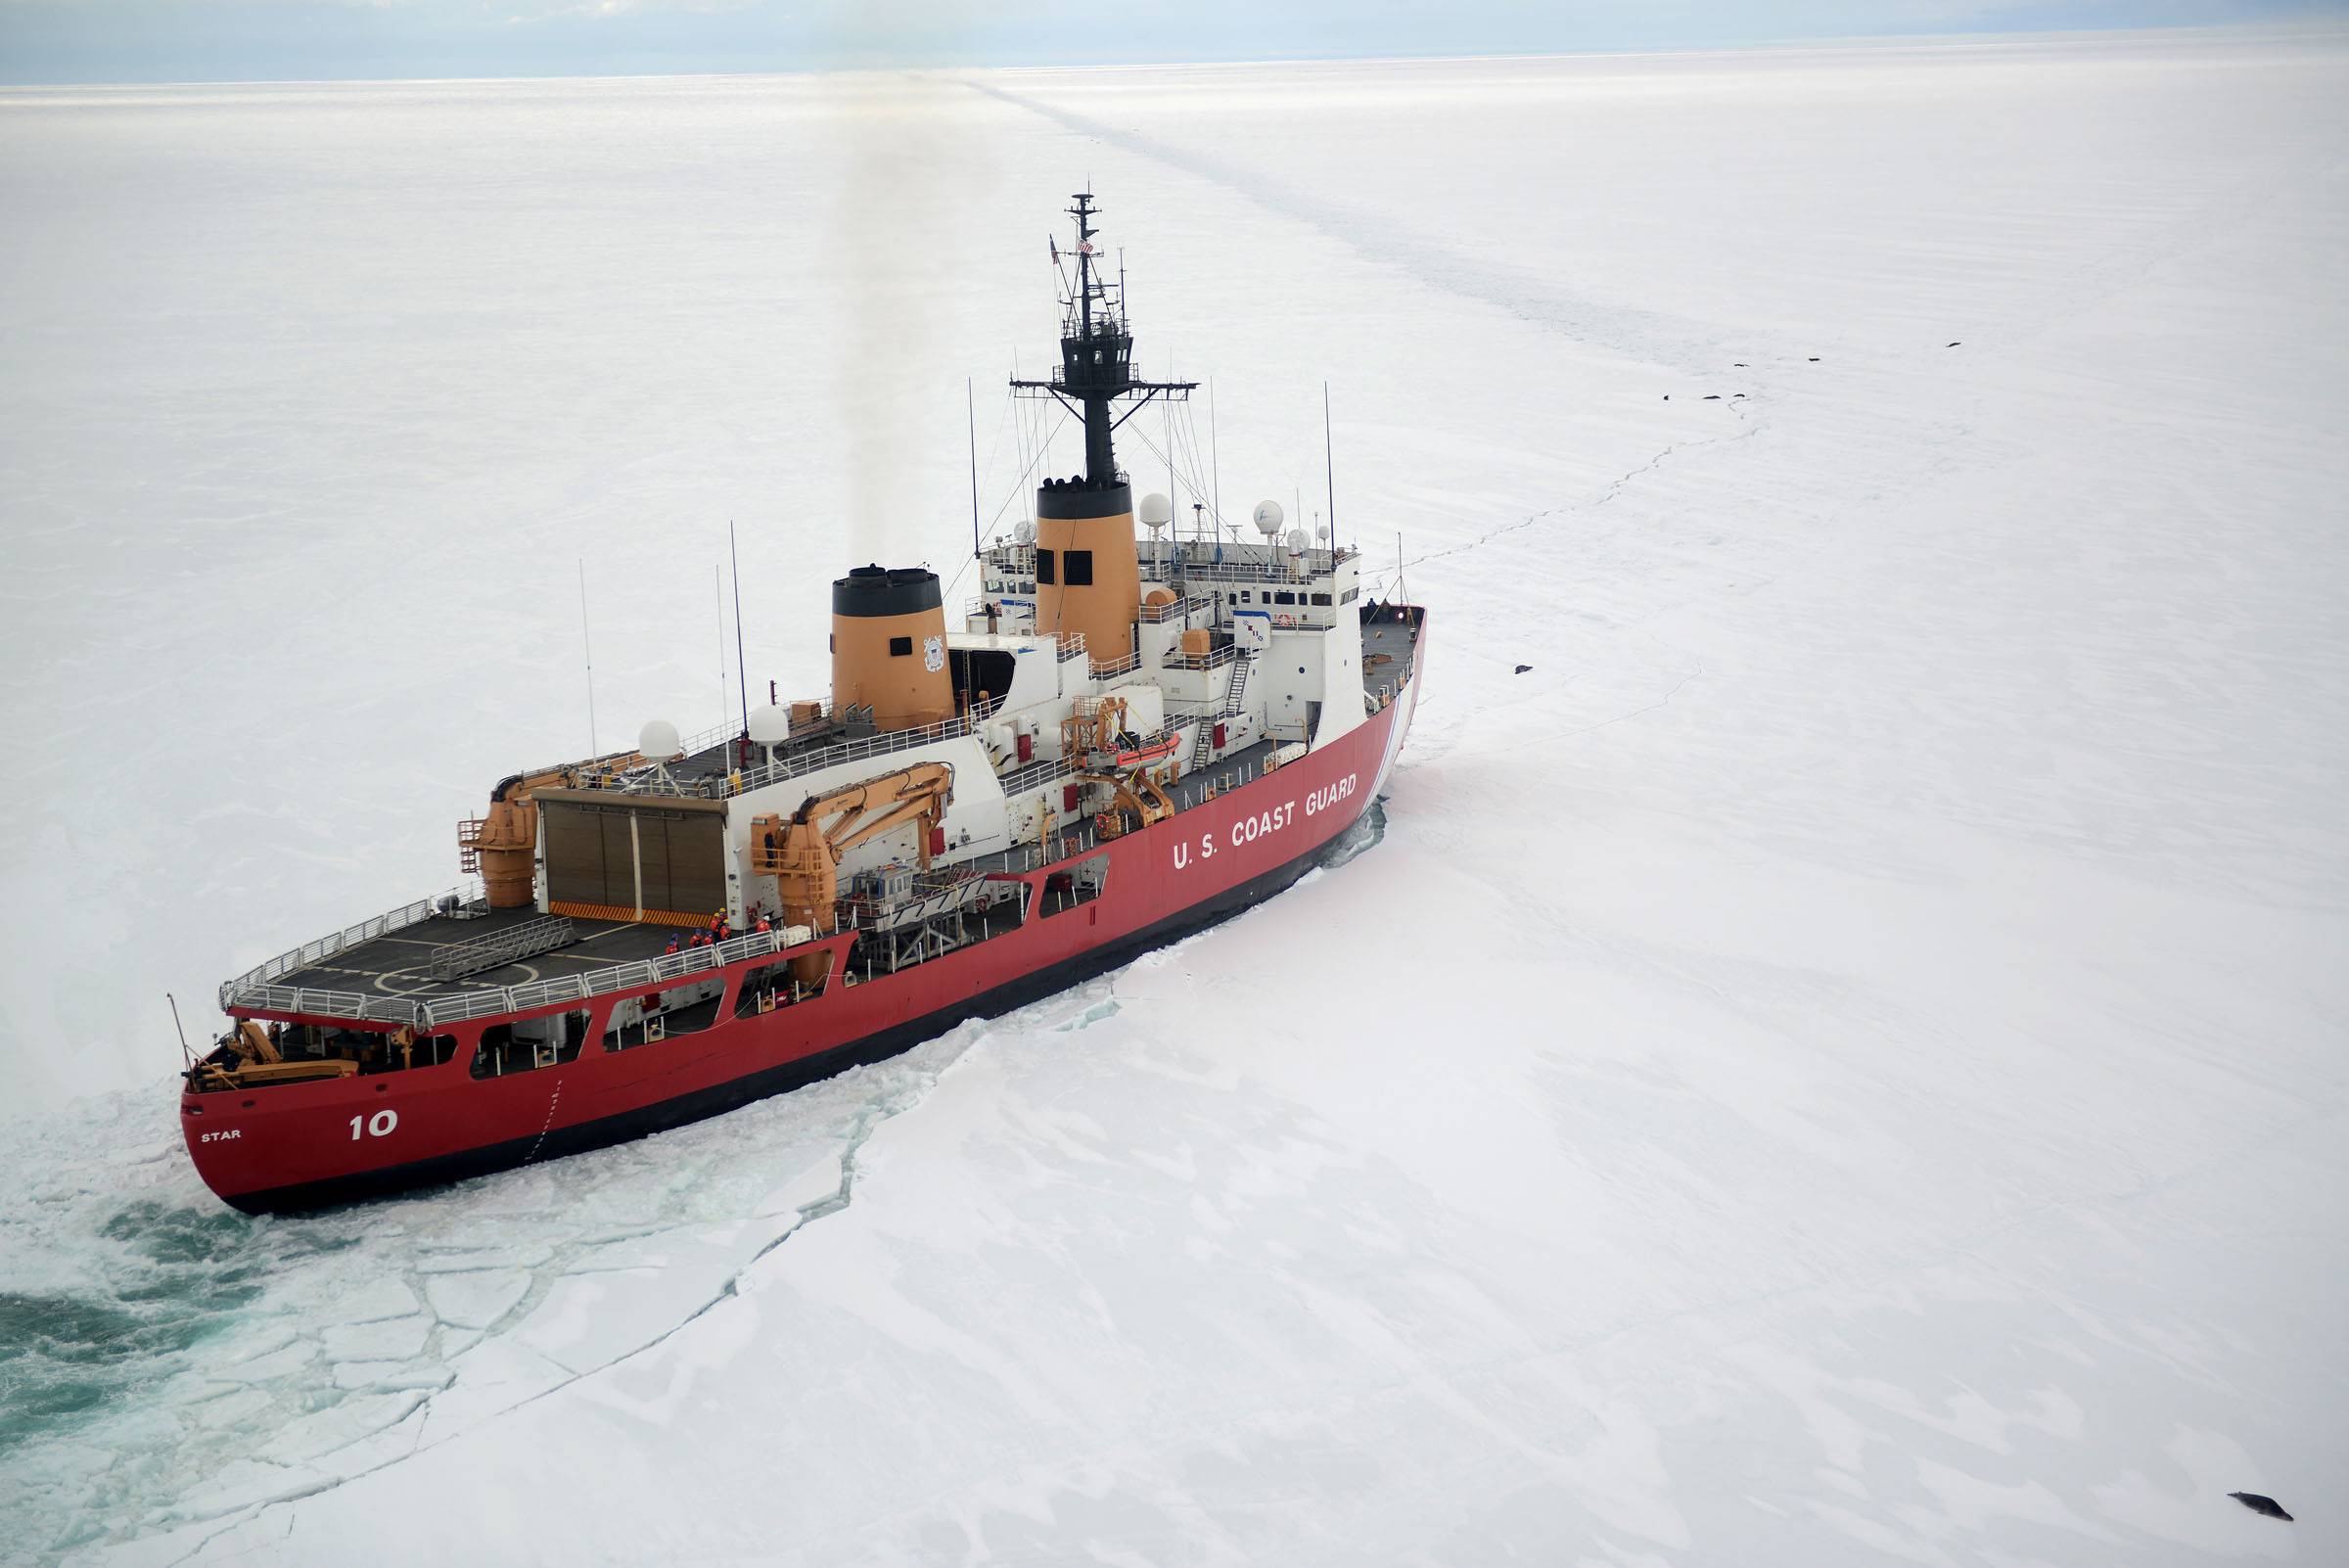 Arne udsagnsord modtage The US Government Must Fund Icebreakers Now